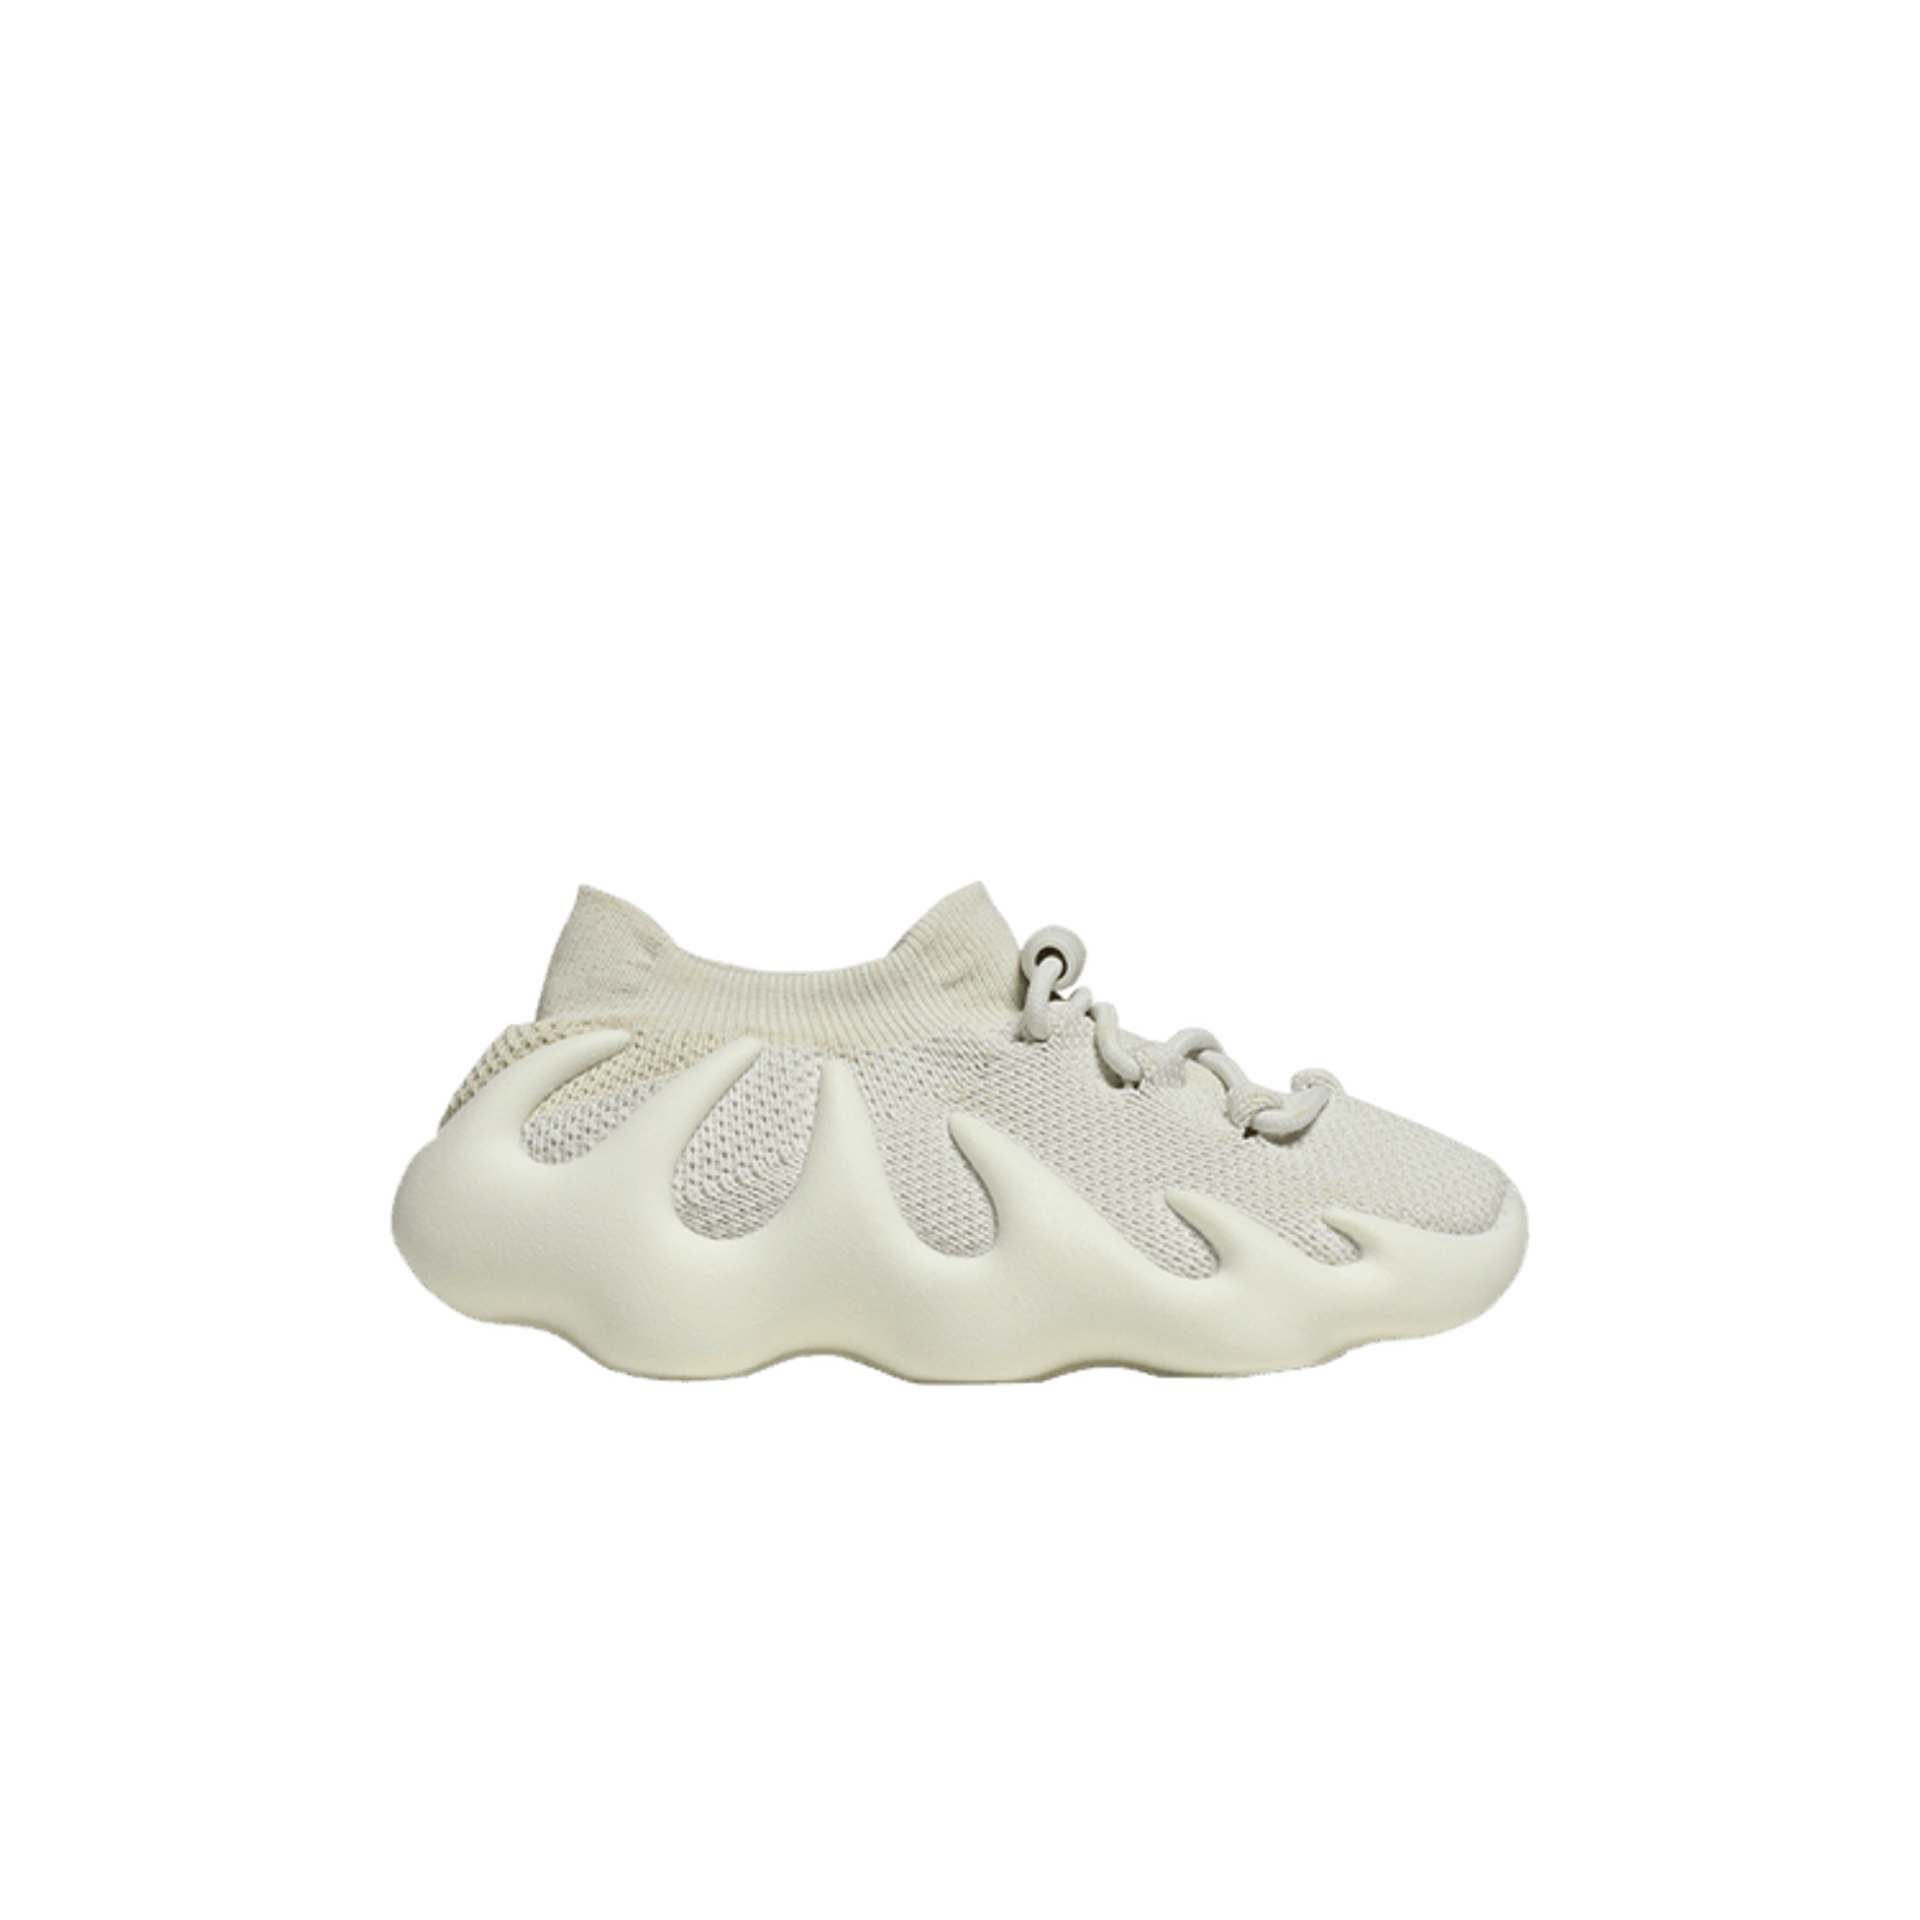 Yeezy 450 Infant 'Cloud White'